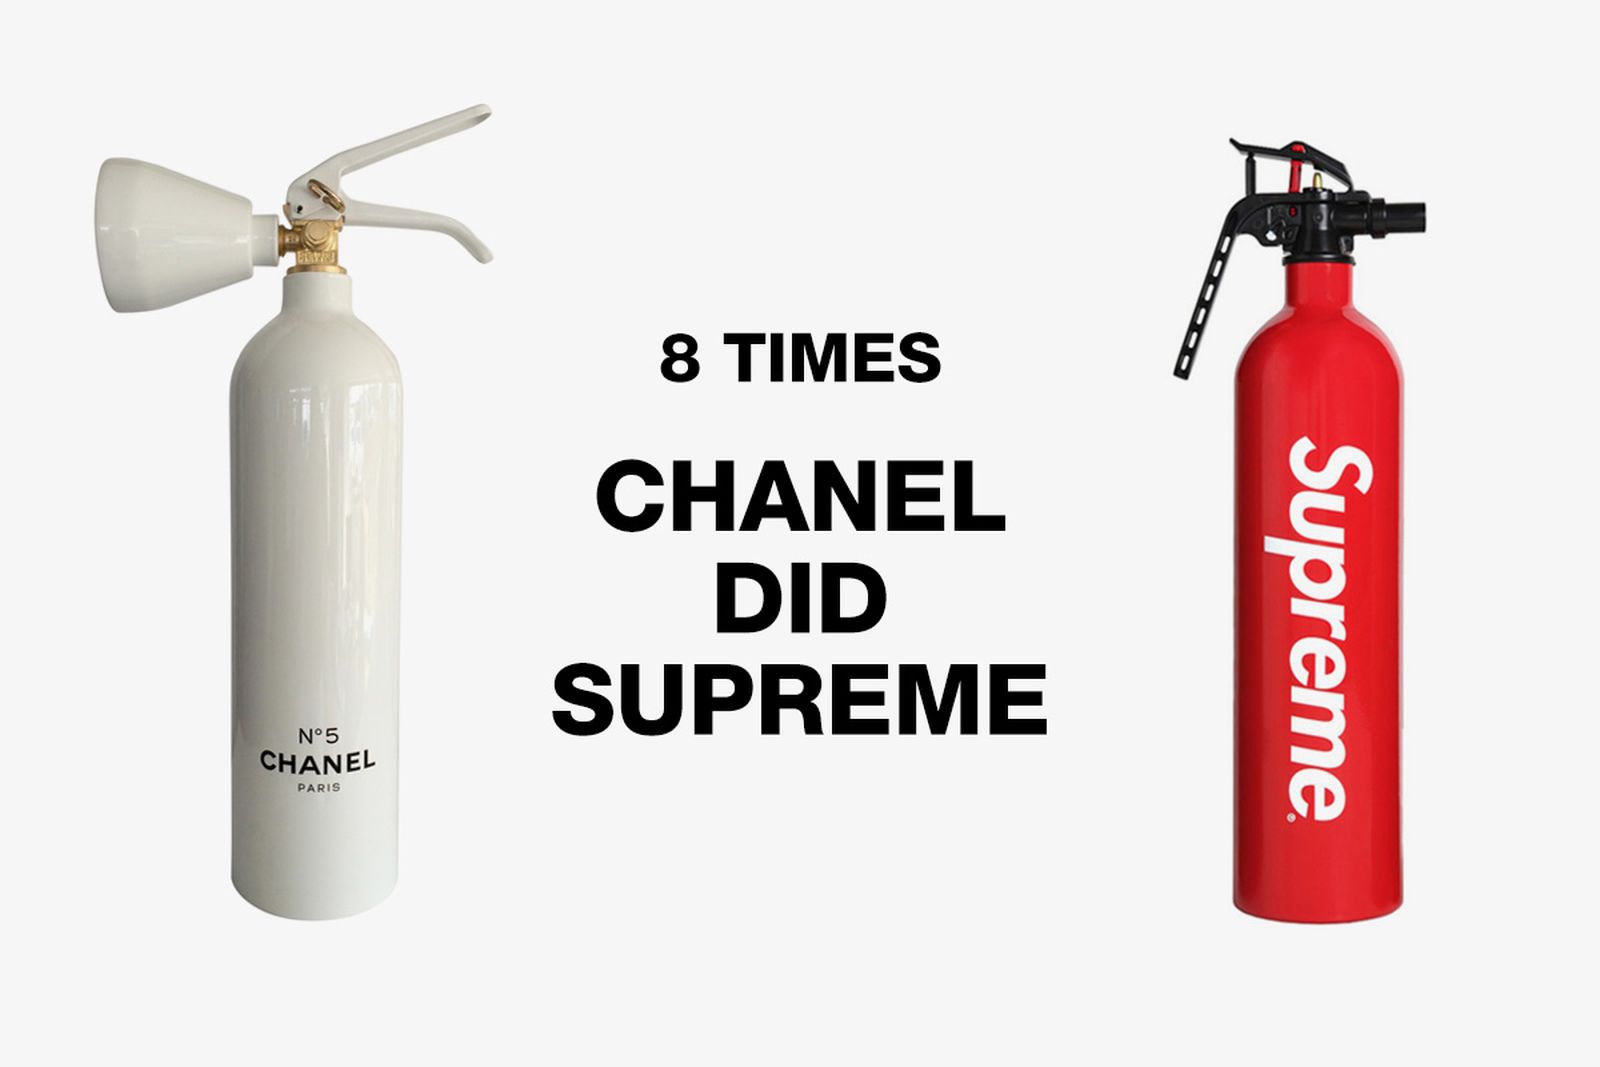 8 Times Chanel & the Same Amazing Accessory